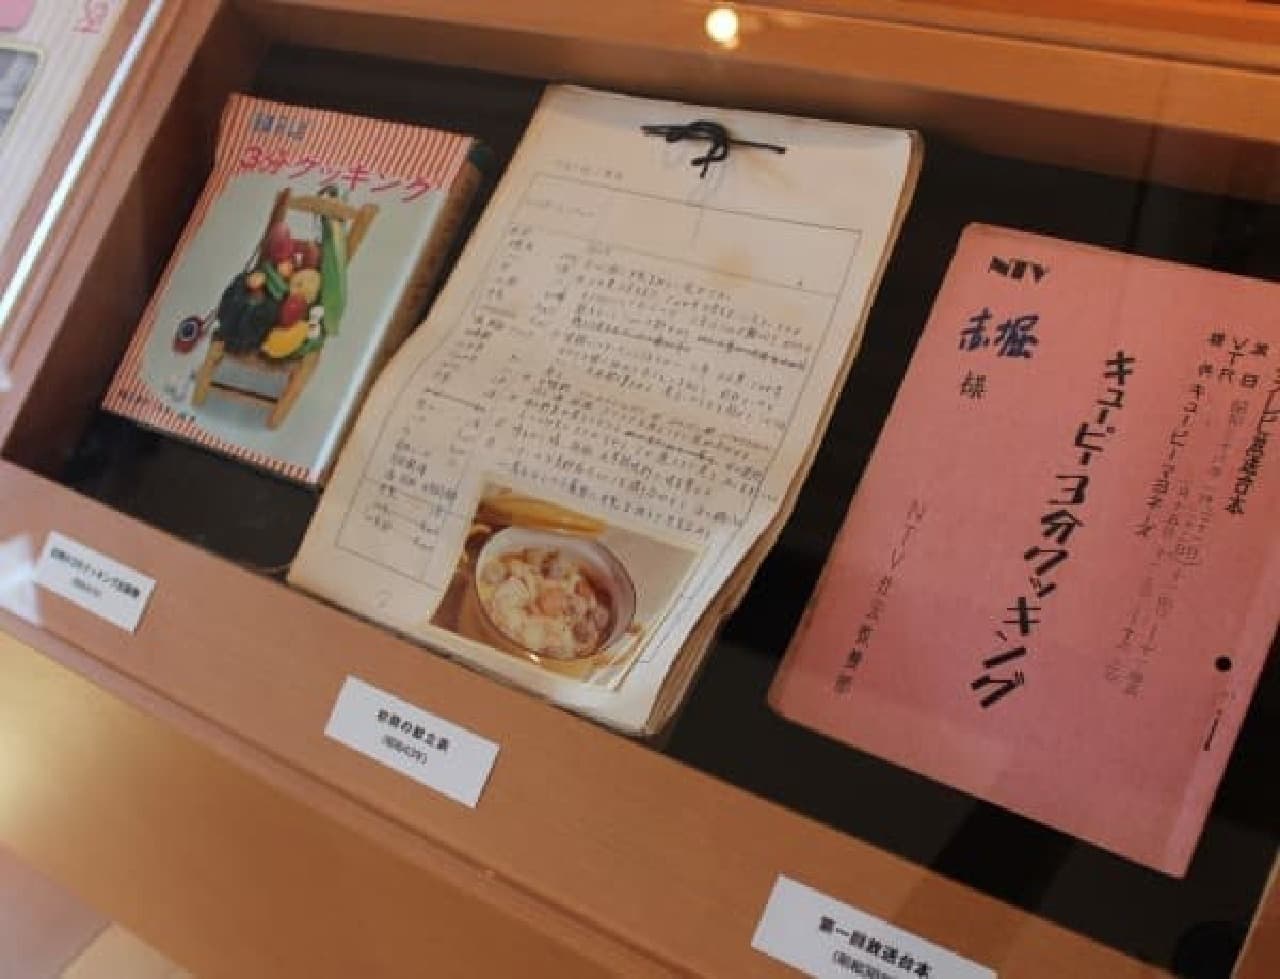 Valuable materials such as scripts from the beginning of broadcasting are also exhibited